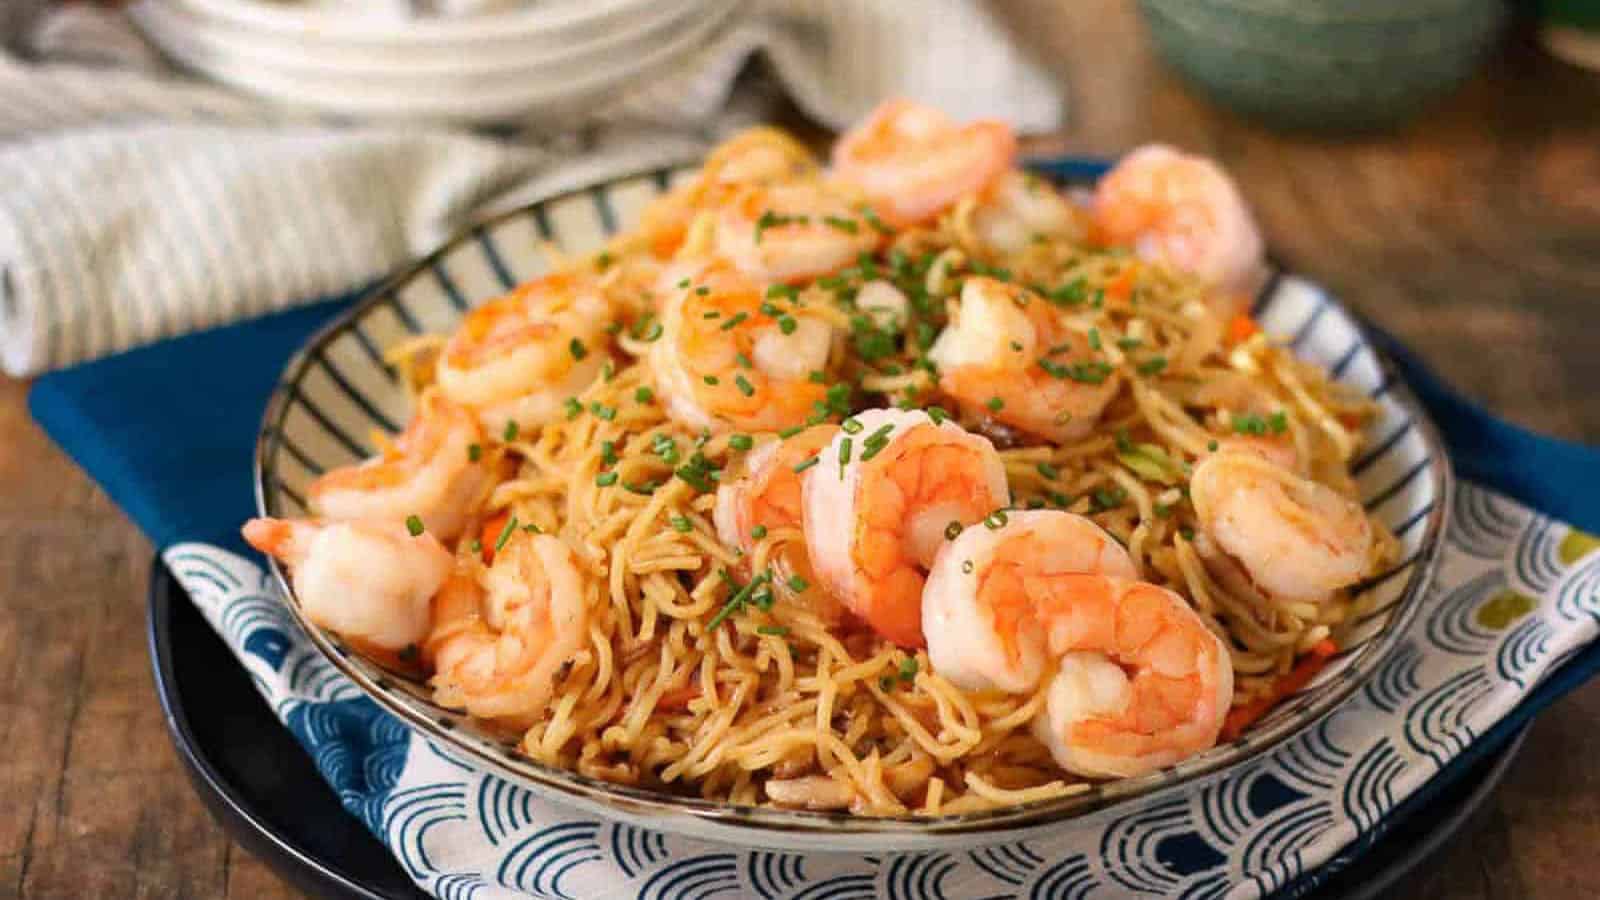 <p>Fancy some seafood in your noodles? The Shrimp Yakisoba is like love at first bite. This Japanese stir-fry noodle dish combines succulent shrimp with a savory, tangy sauce. Every bite is a burst of flavor that’s hard to forget. Be warned: one dish might not be enough!<br><strong>Get the Recipe: </strong><a href="https://allwaysdelicious.com/shrimp-yakisoba/?utm_source=msn&utm_medium=page&utm_campaign=msn">Shrimp Yakisoba</a></p>